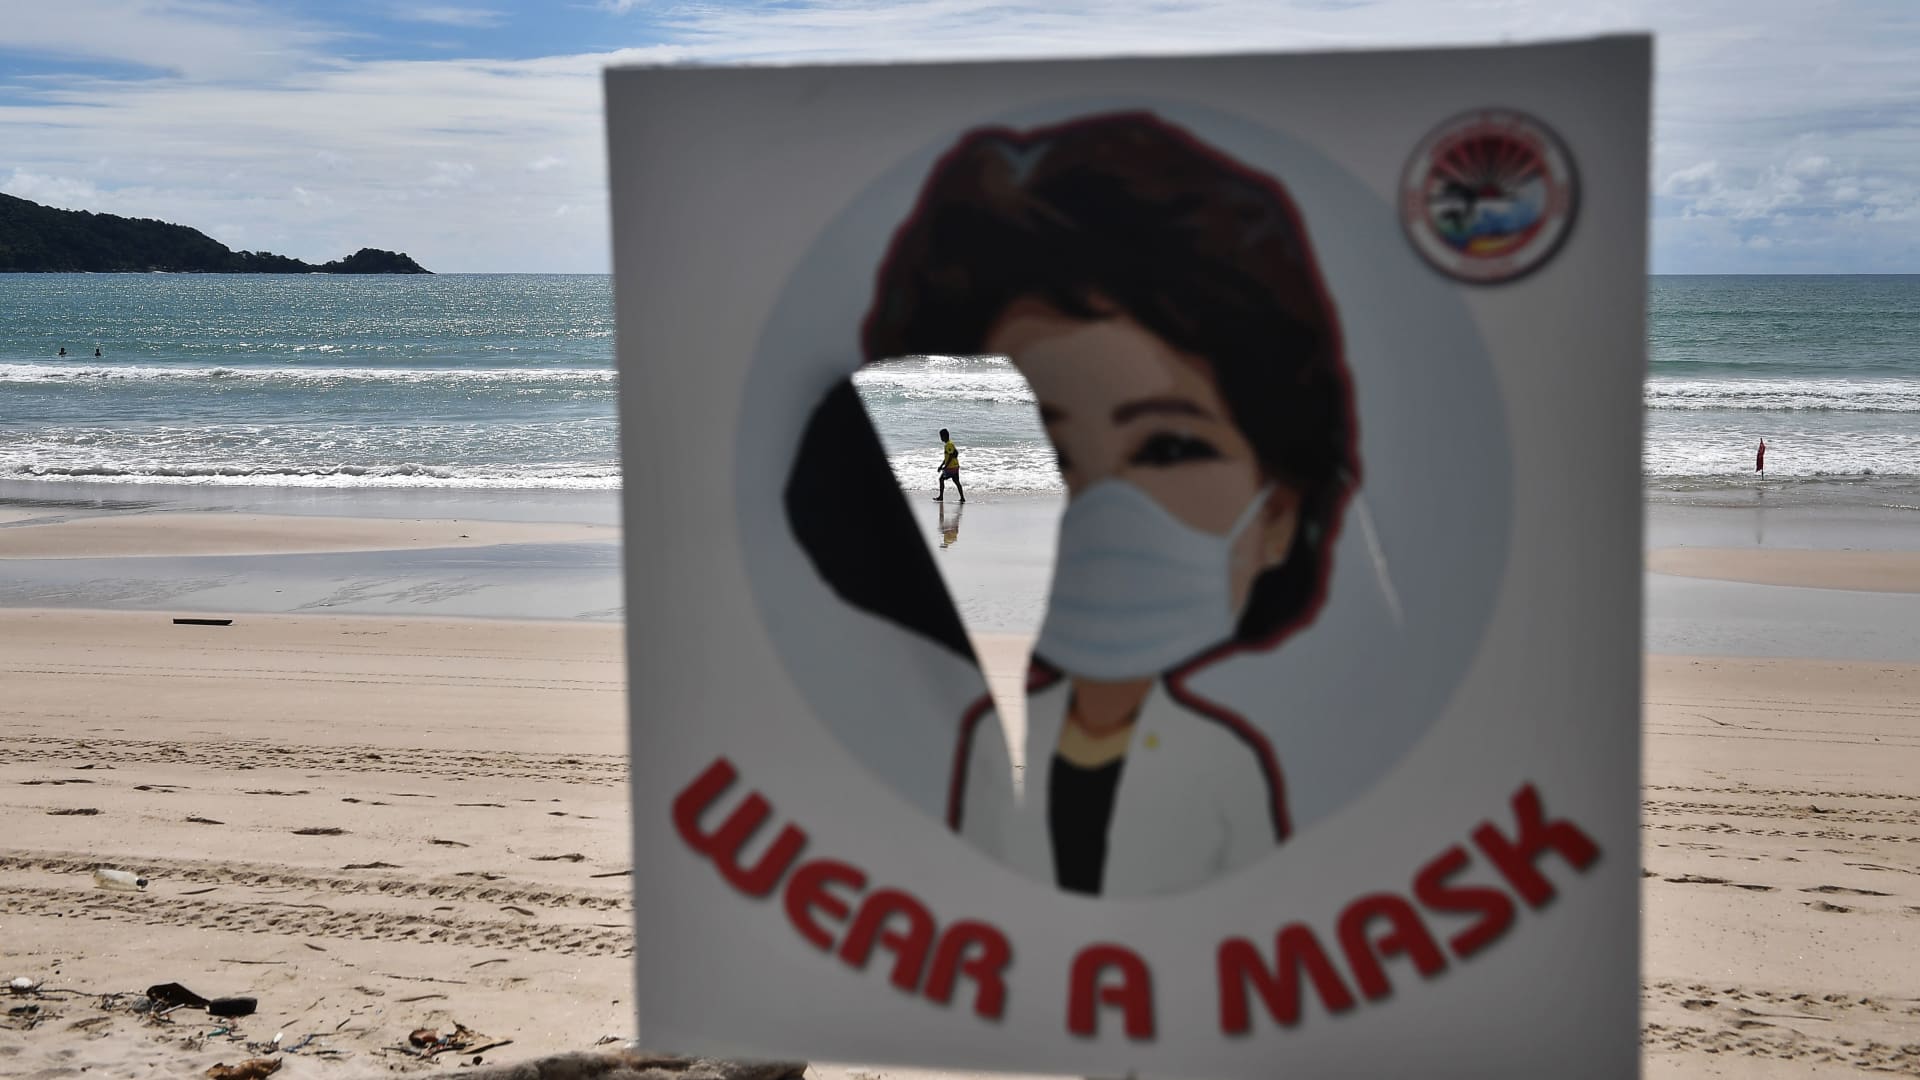 Masks, which were once required at the beach, are no longer mandatory in Thailand.